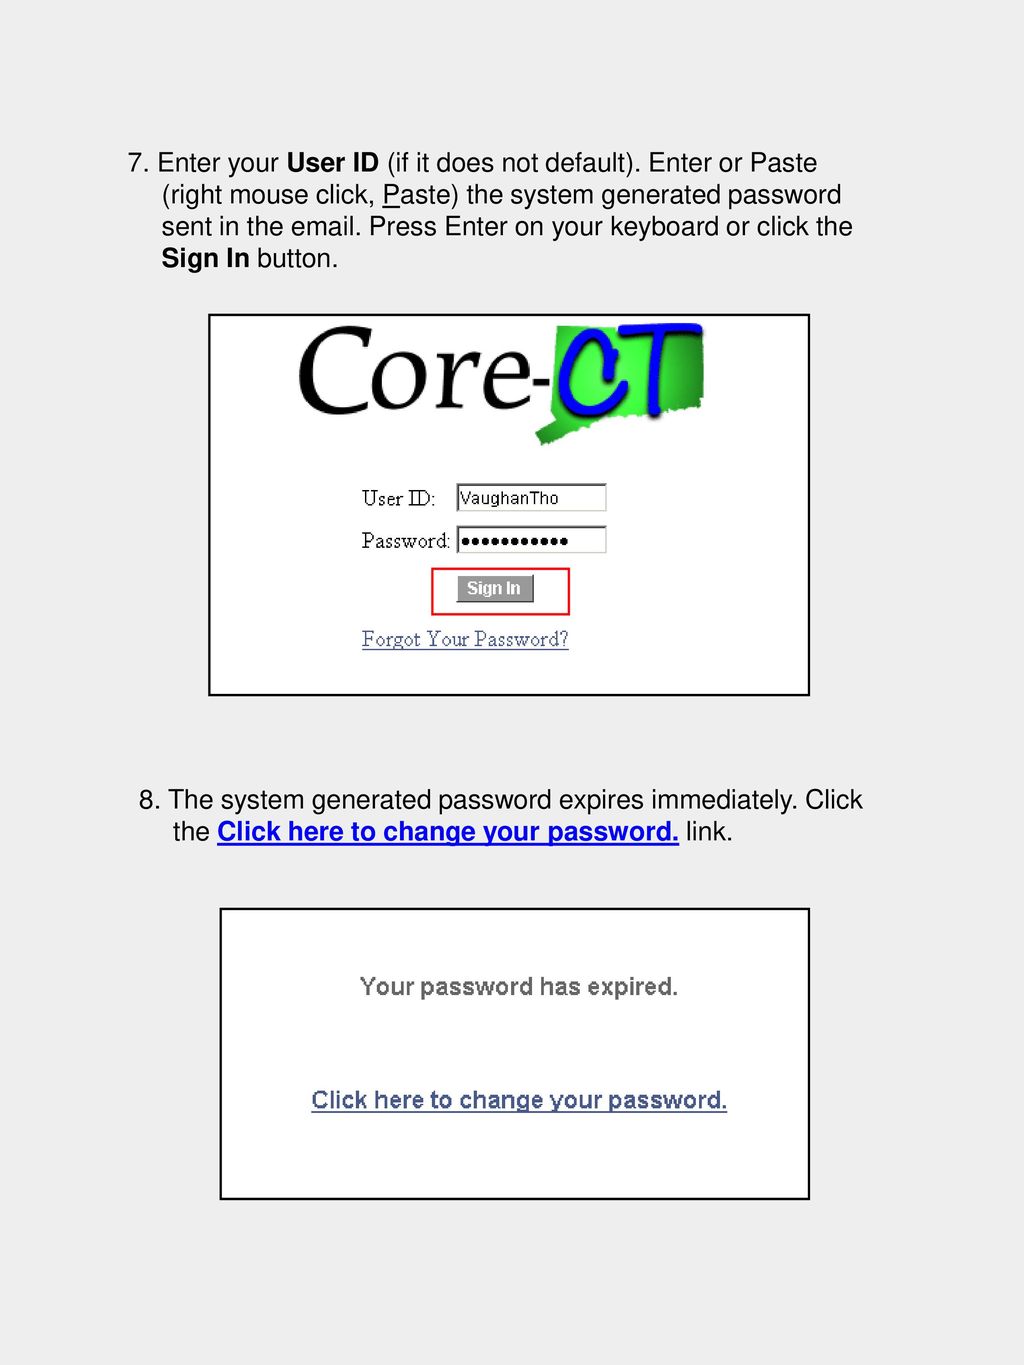 7. Enter your User ID (if it does not default)